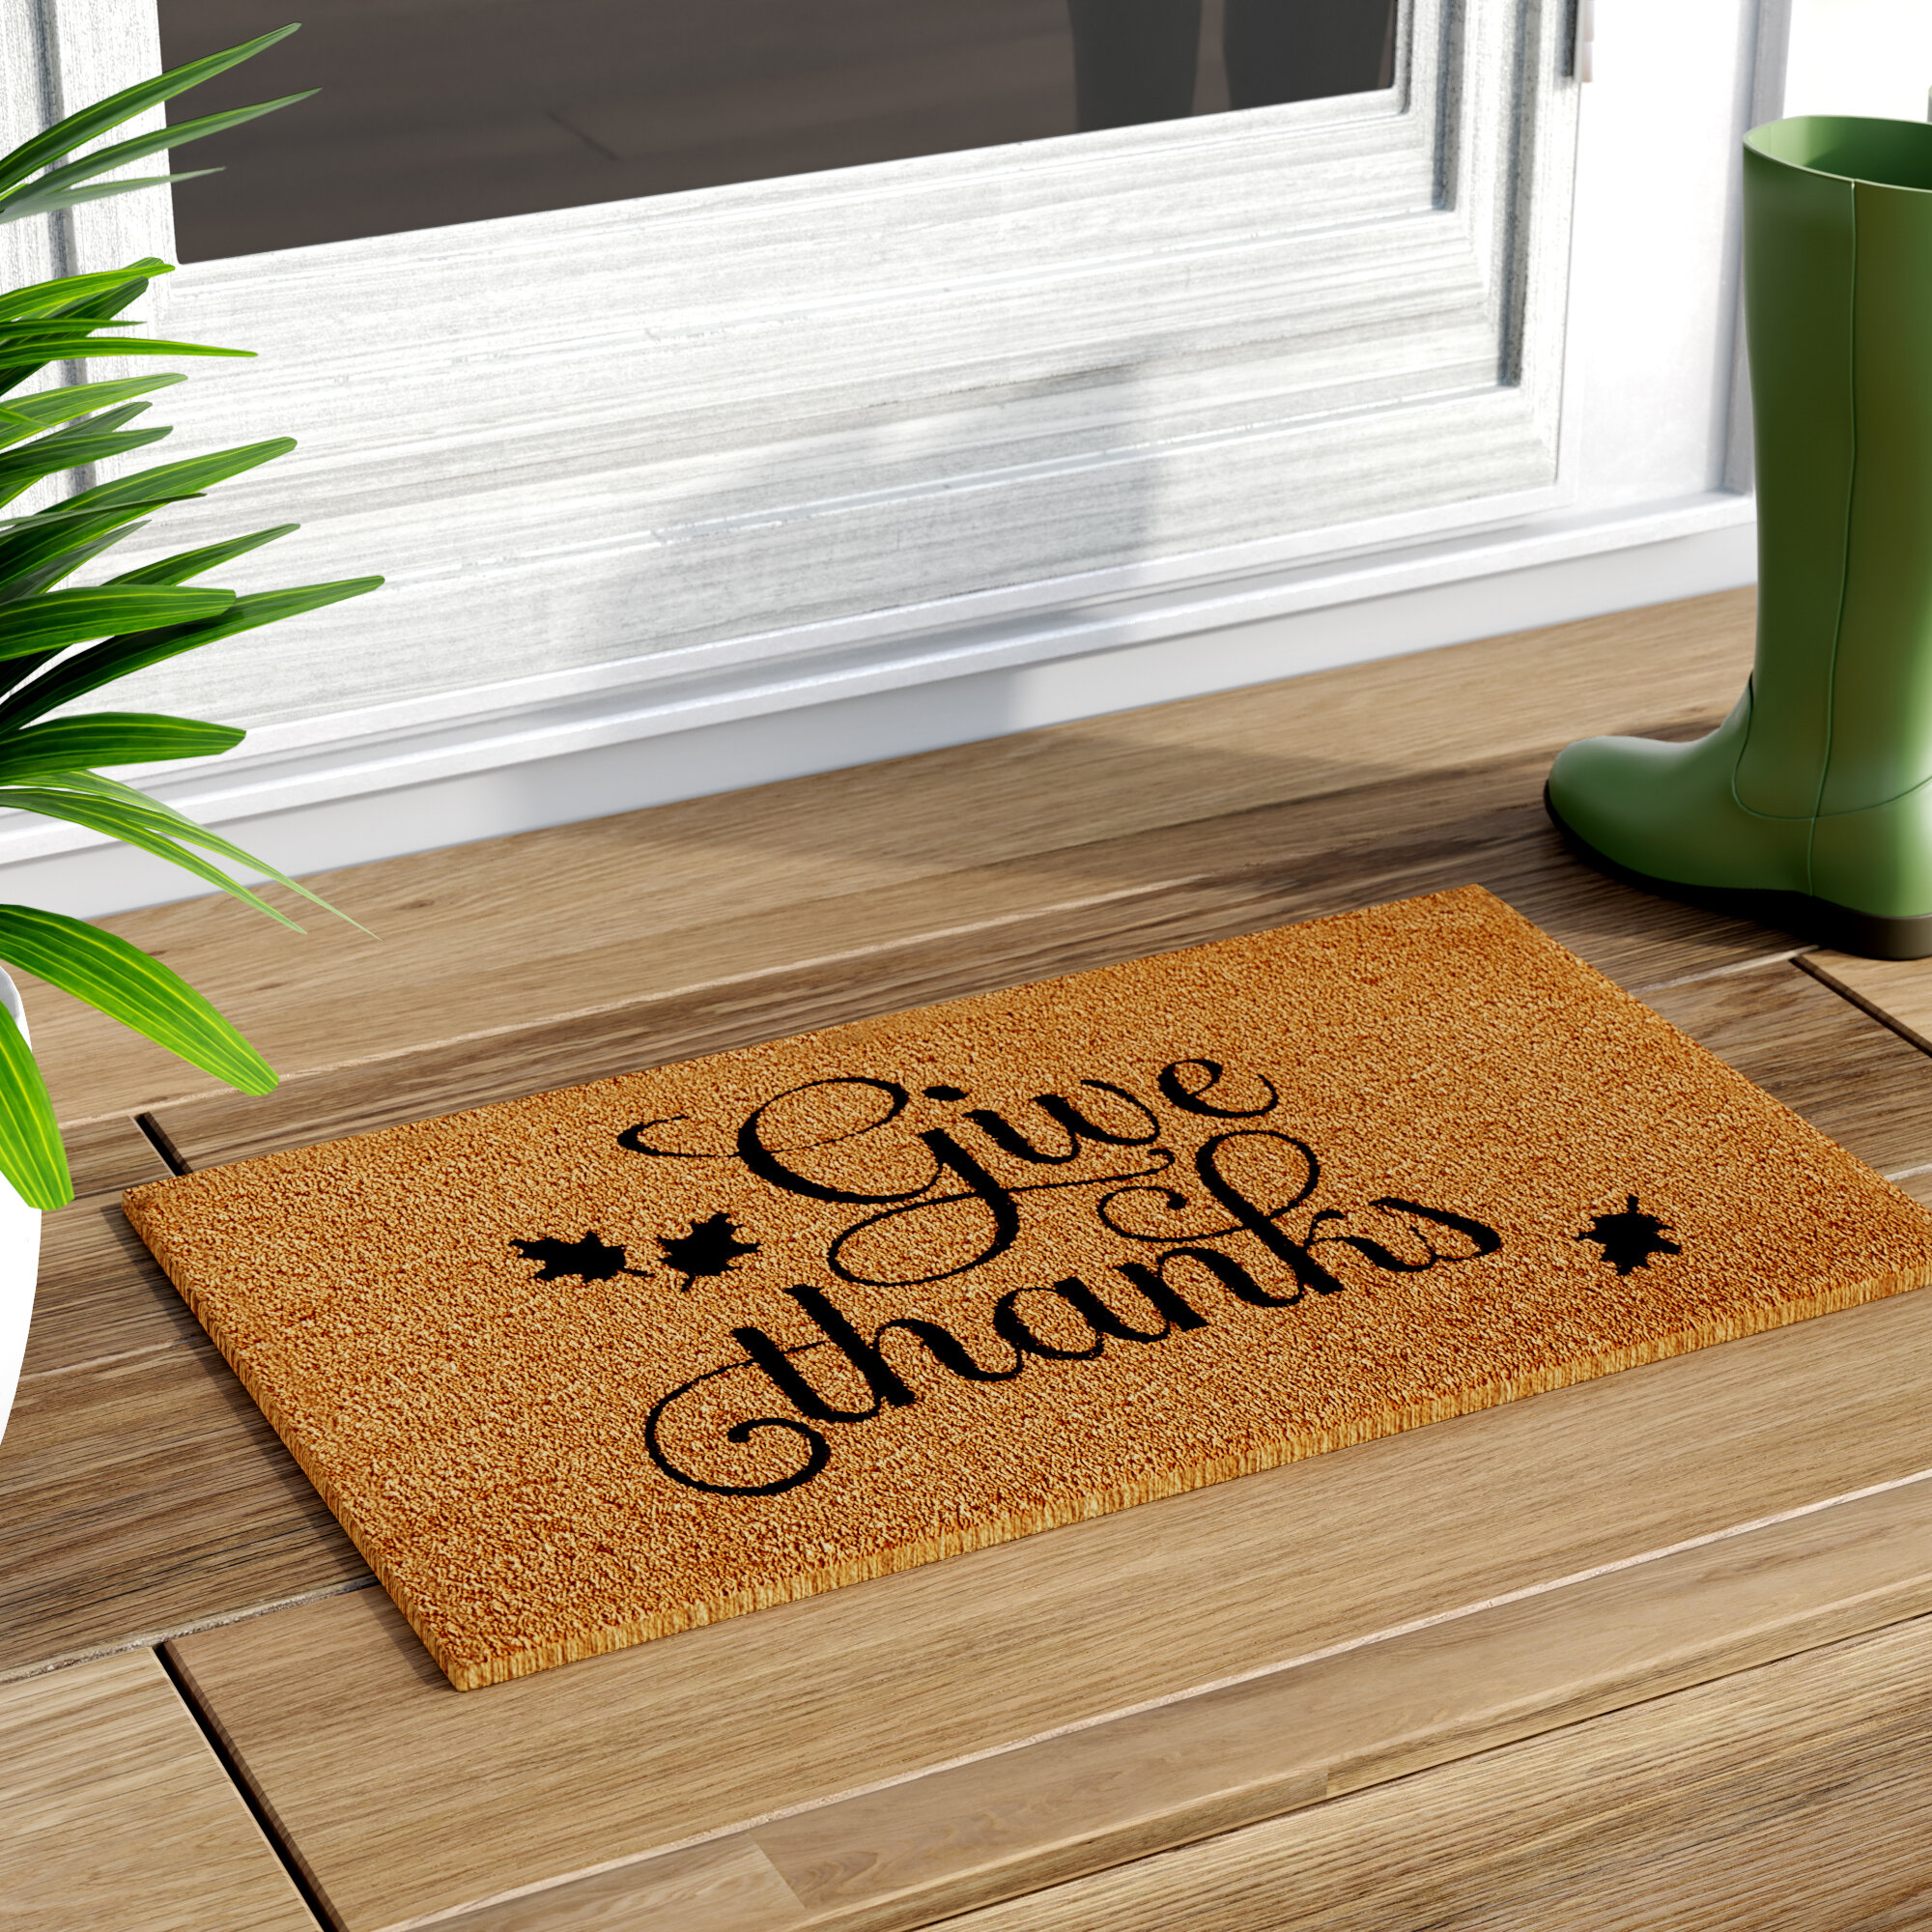 Greetings from Your Humble Abode! - Welcome Home Doormat